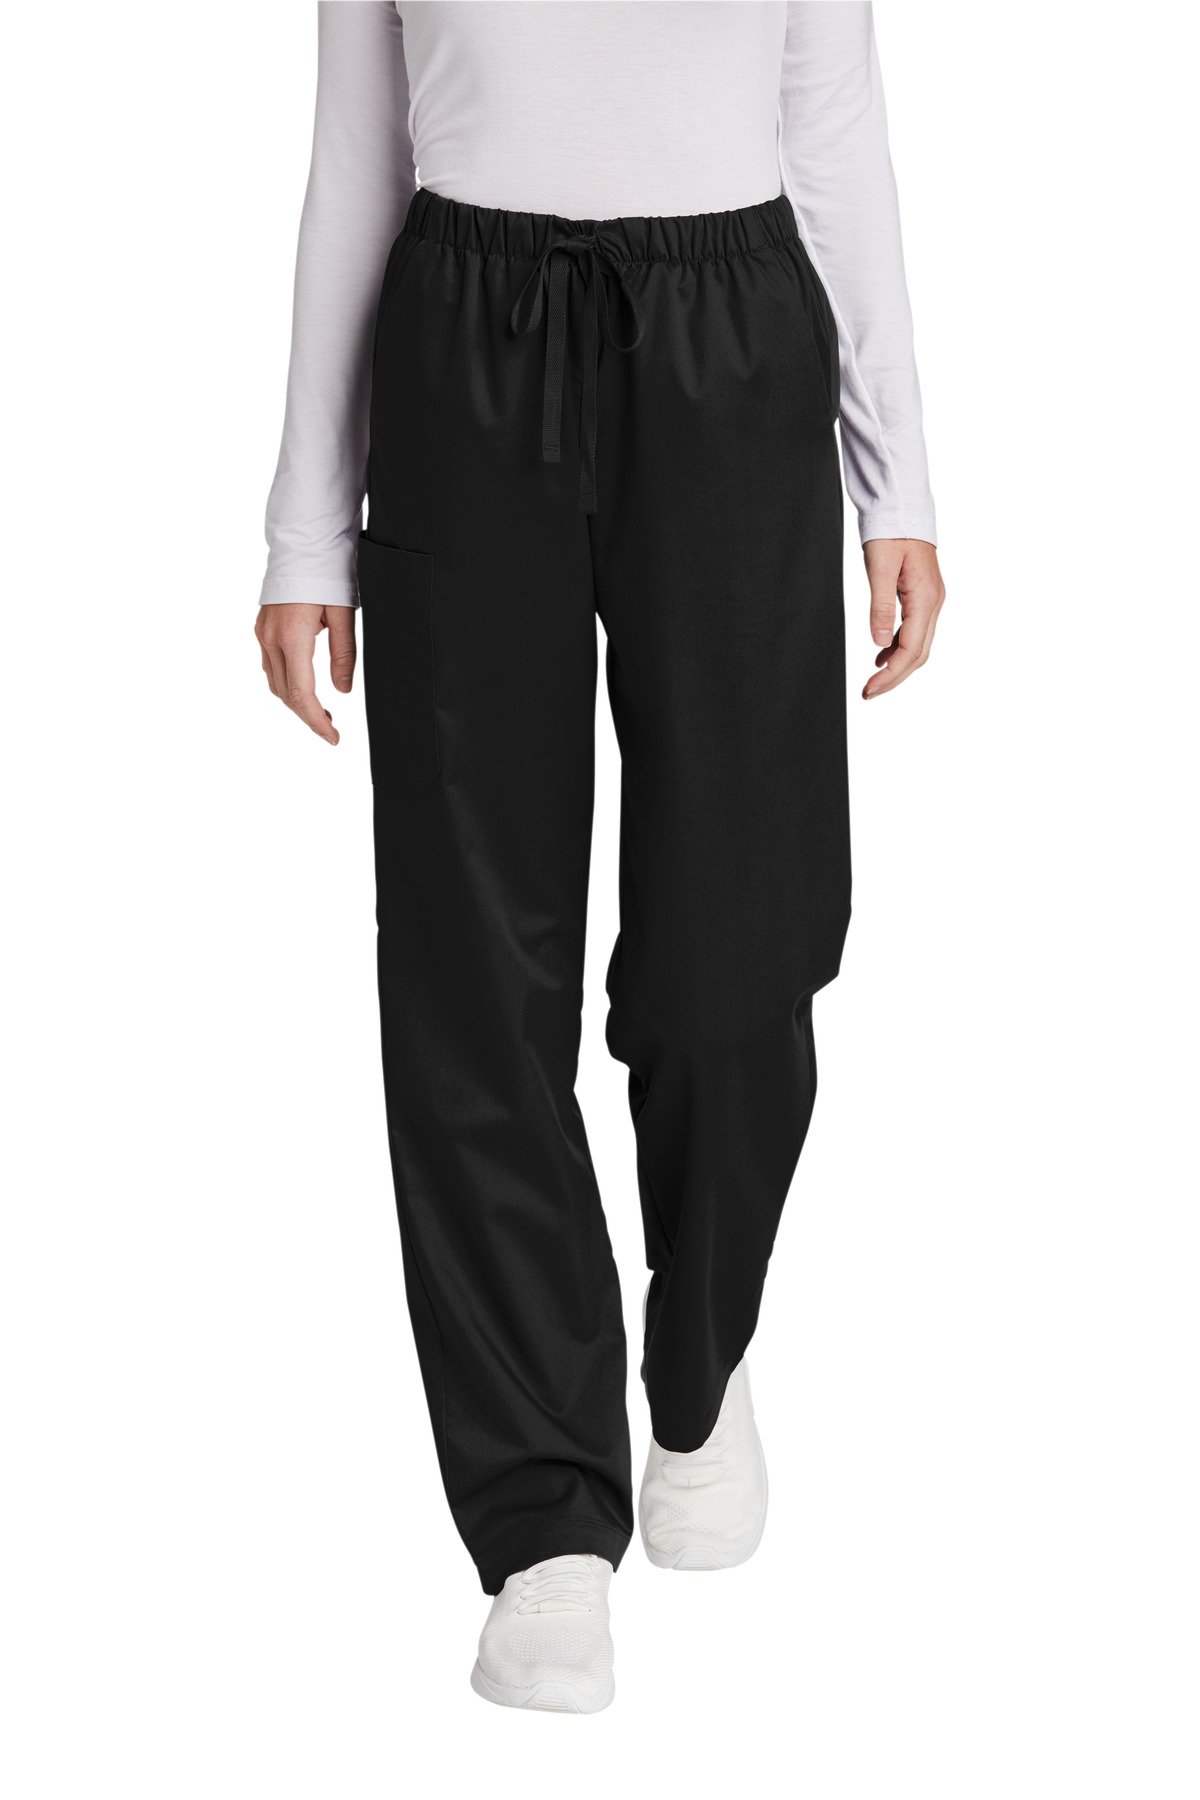 Front view of Wink Women’s WorkFlex Cargo Pant